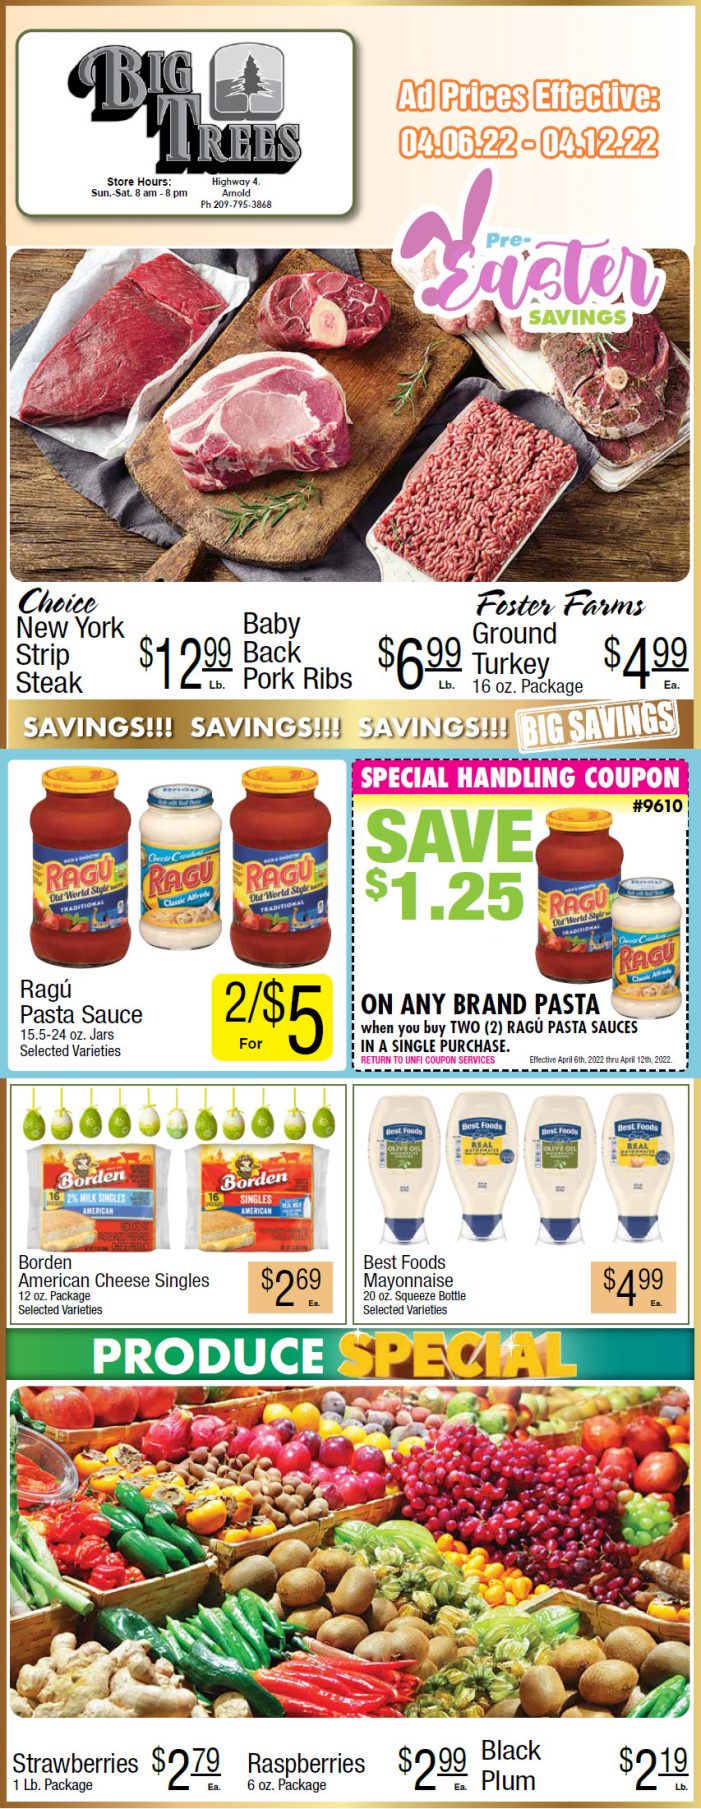 Big Trees Market Weekly Ad & Grocery Specials April 6th Through April 12th! Shop Local & Save!